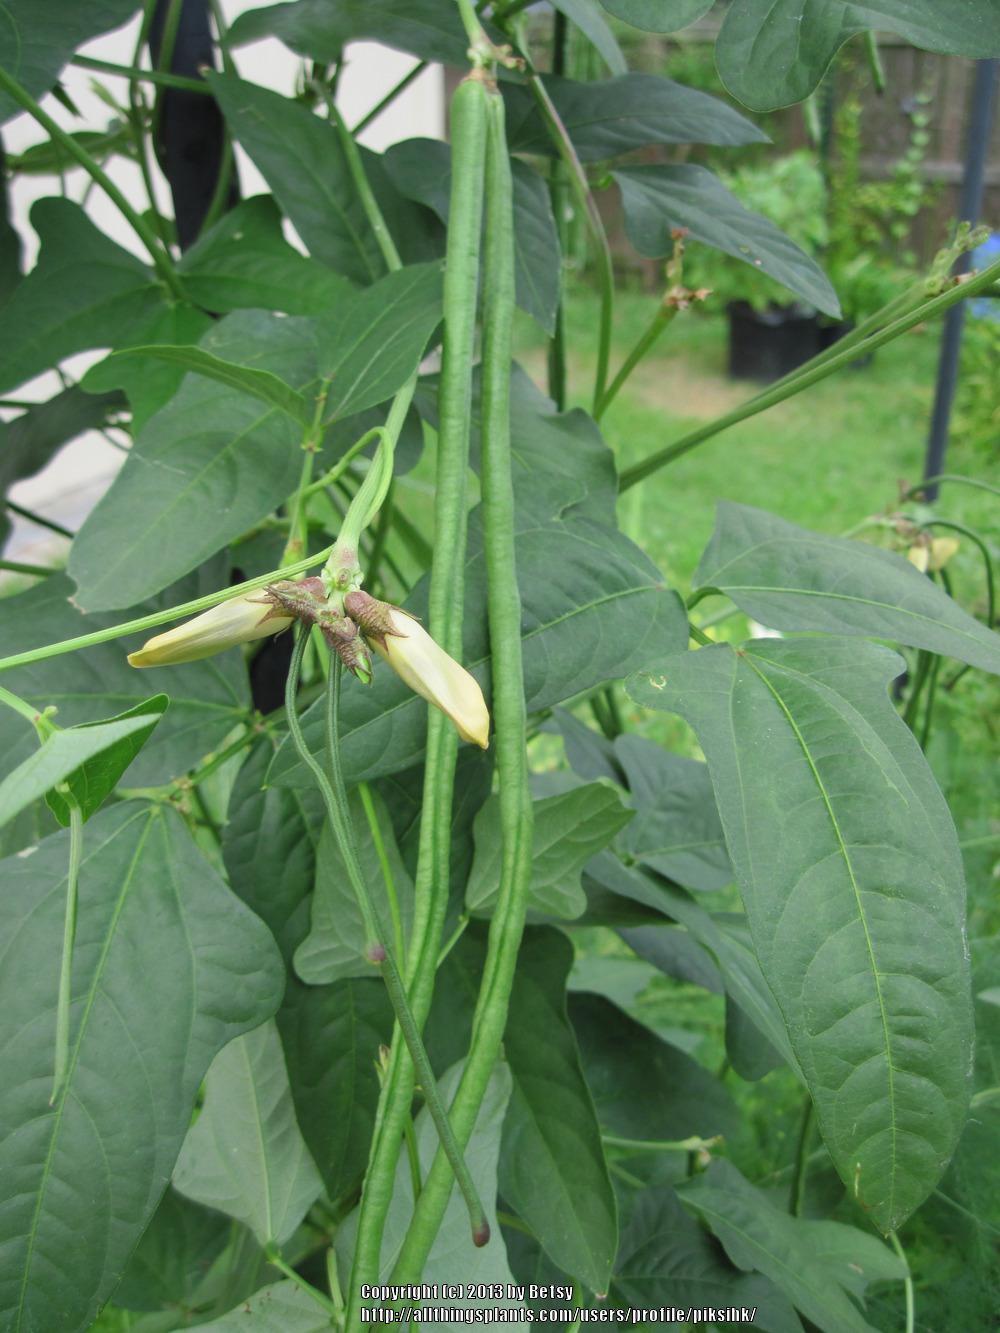 Photo of Yardlong Bean (Vigna unguiculata subsp. sesquipedalis) uploaded by piksihk